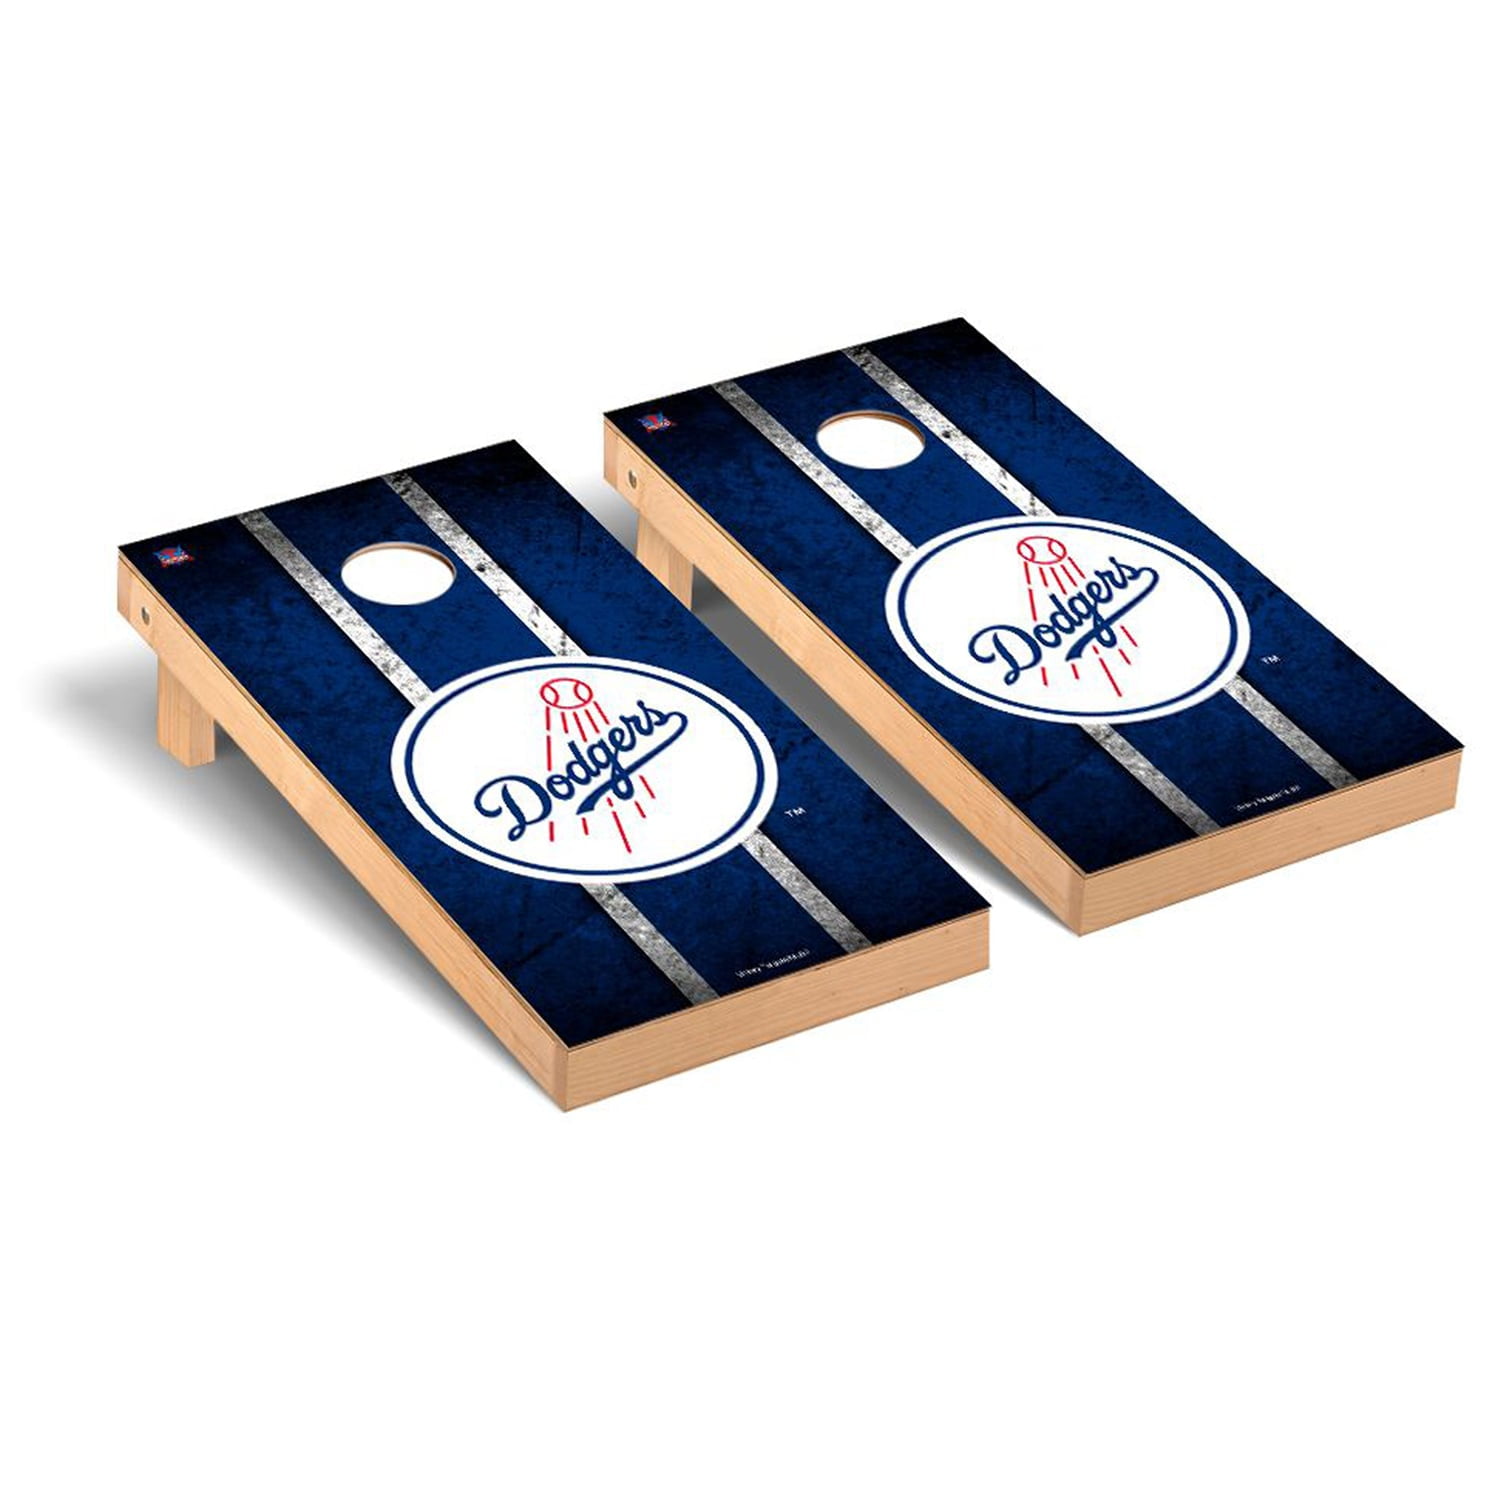 LA Dodgers Decals Corn hole set of 2 decals Free shipping Made in USA 